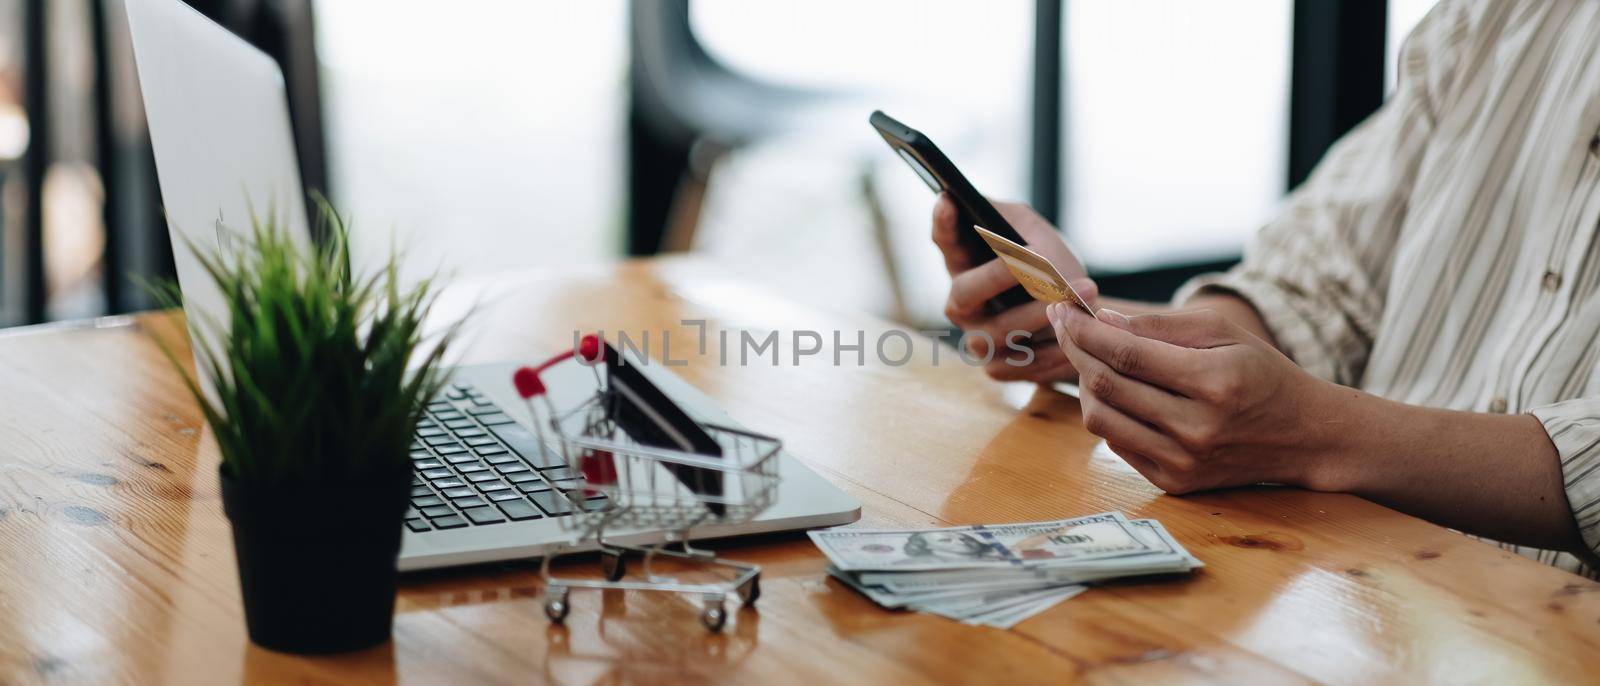 shopping online with credit card using smart phone at home. online purchase concept by nateemee